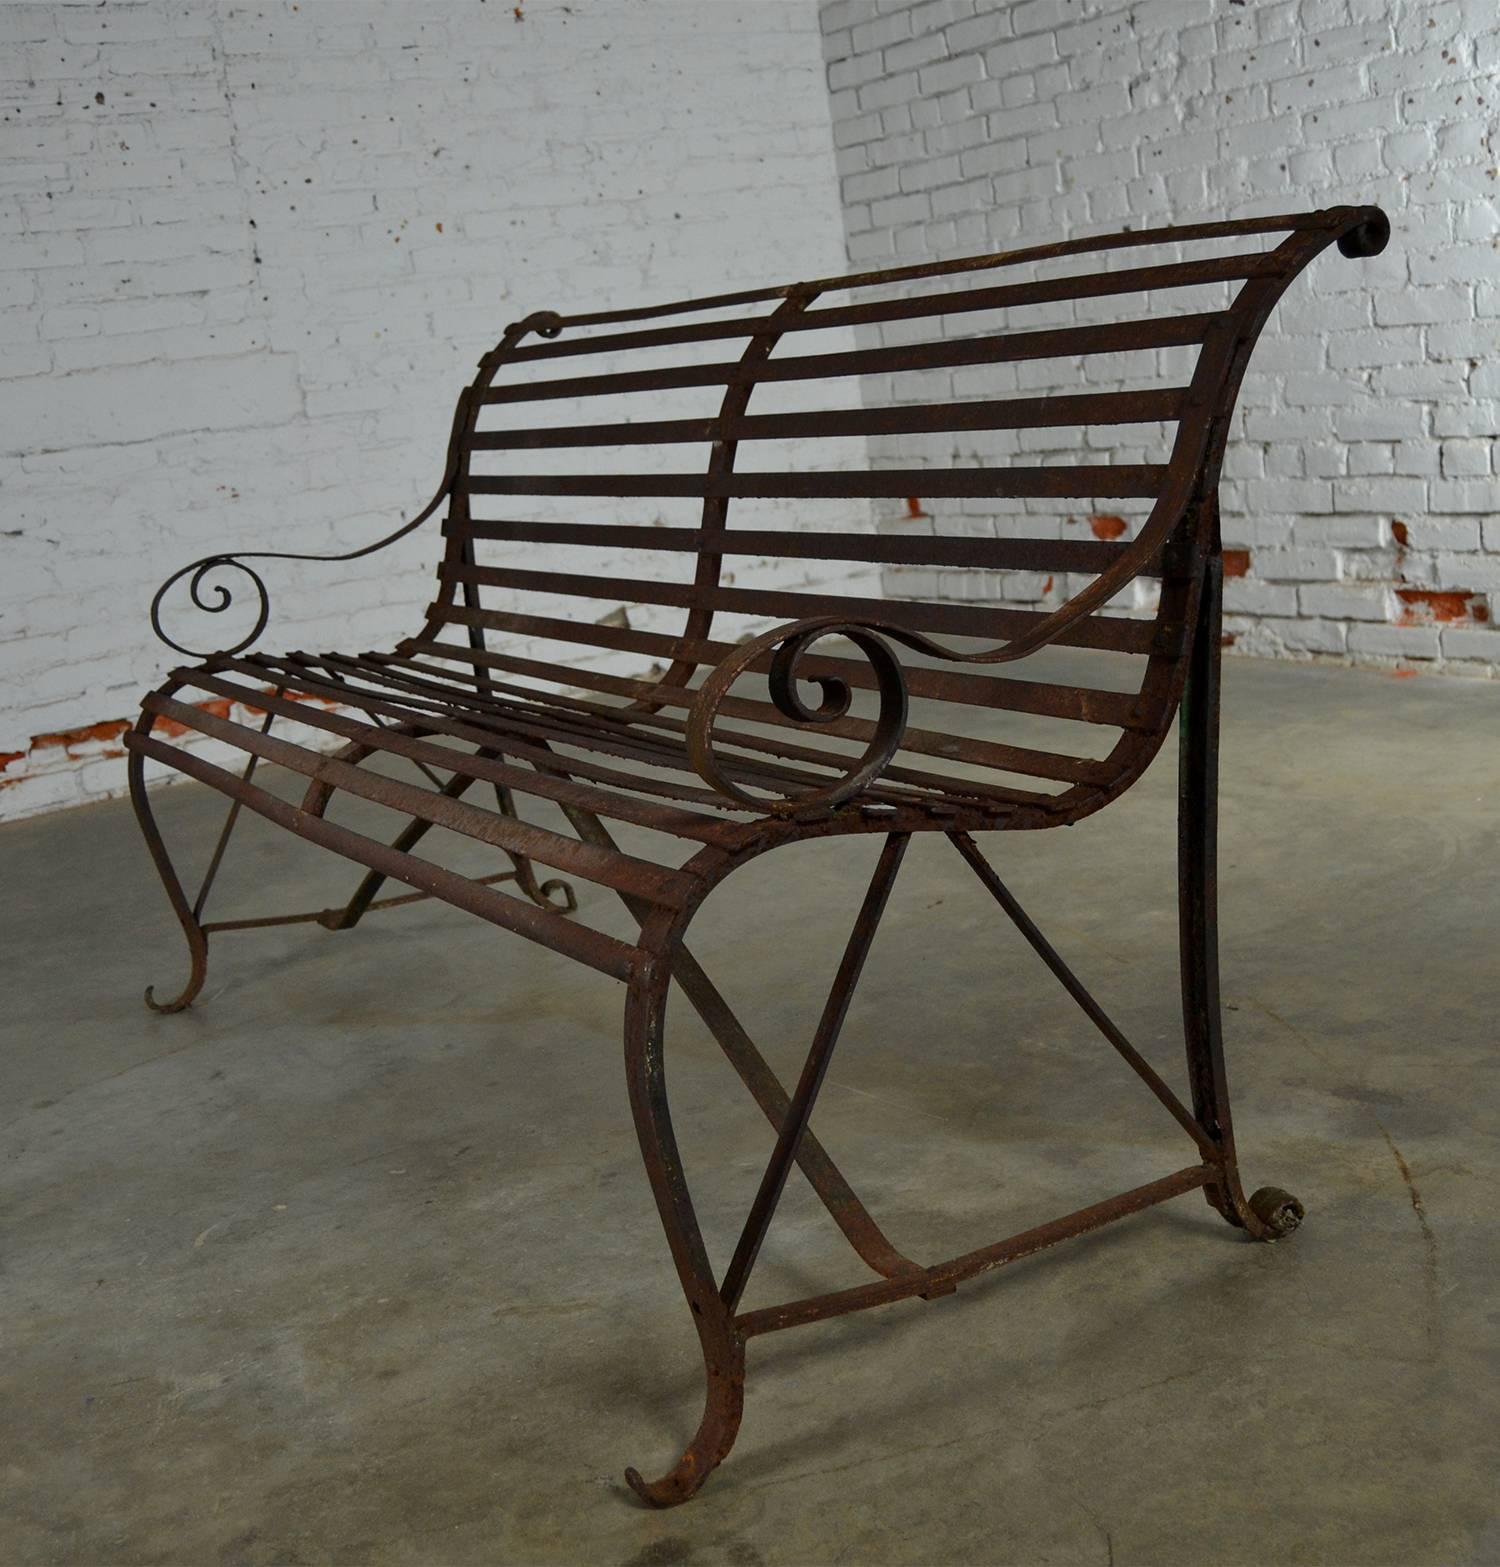 Incredible antique 19th century forged strap iron and slatted garden bench. It has loads of wonderful rusty iron patina and lots of charm.

This garden bench just oozes charm. It will transform any yard, porch or gazebo into a retreat full of